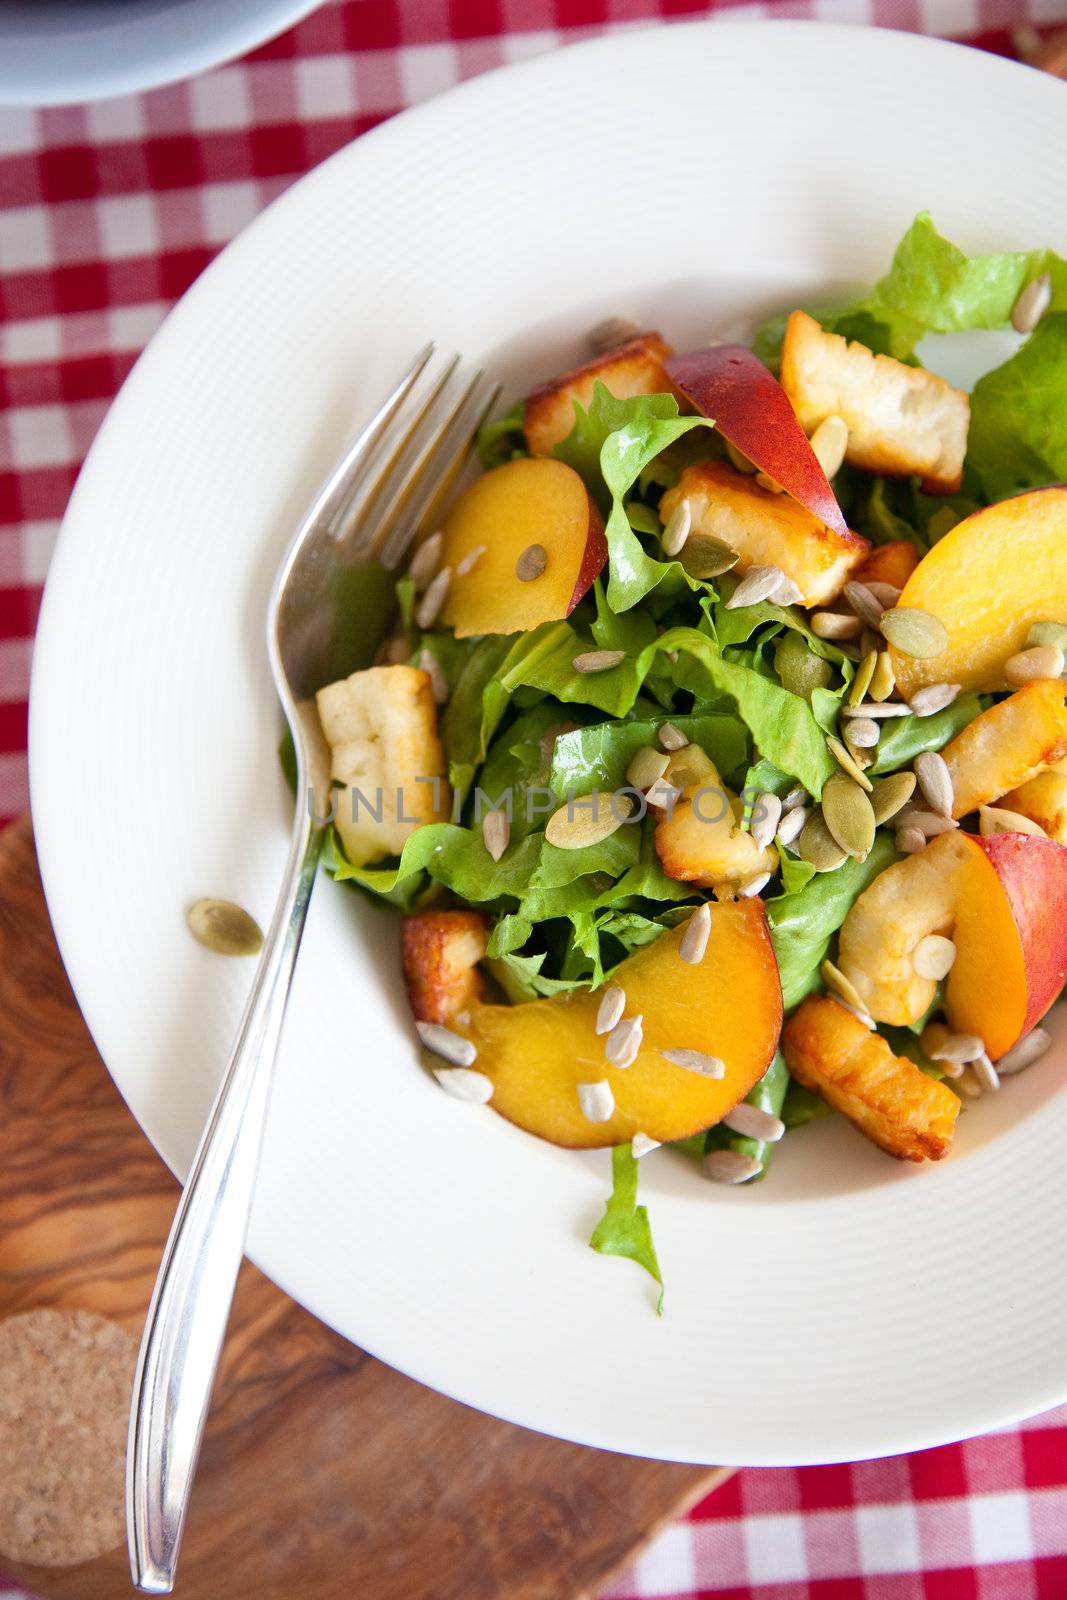 Delicious salad with endive, haloumi and nectarines